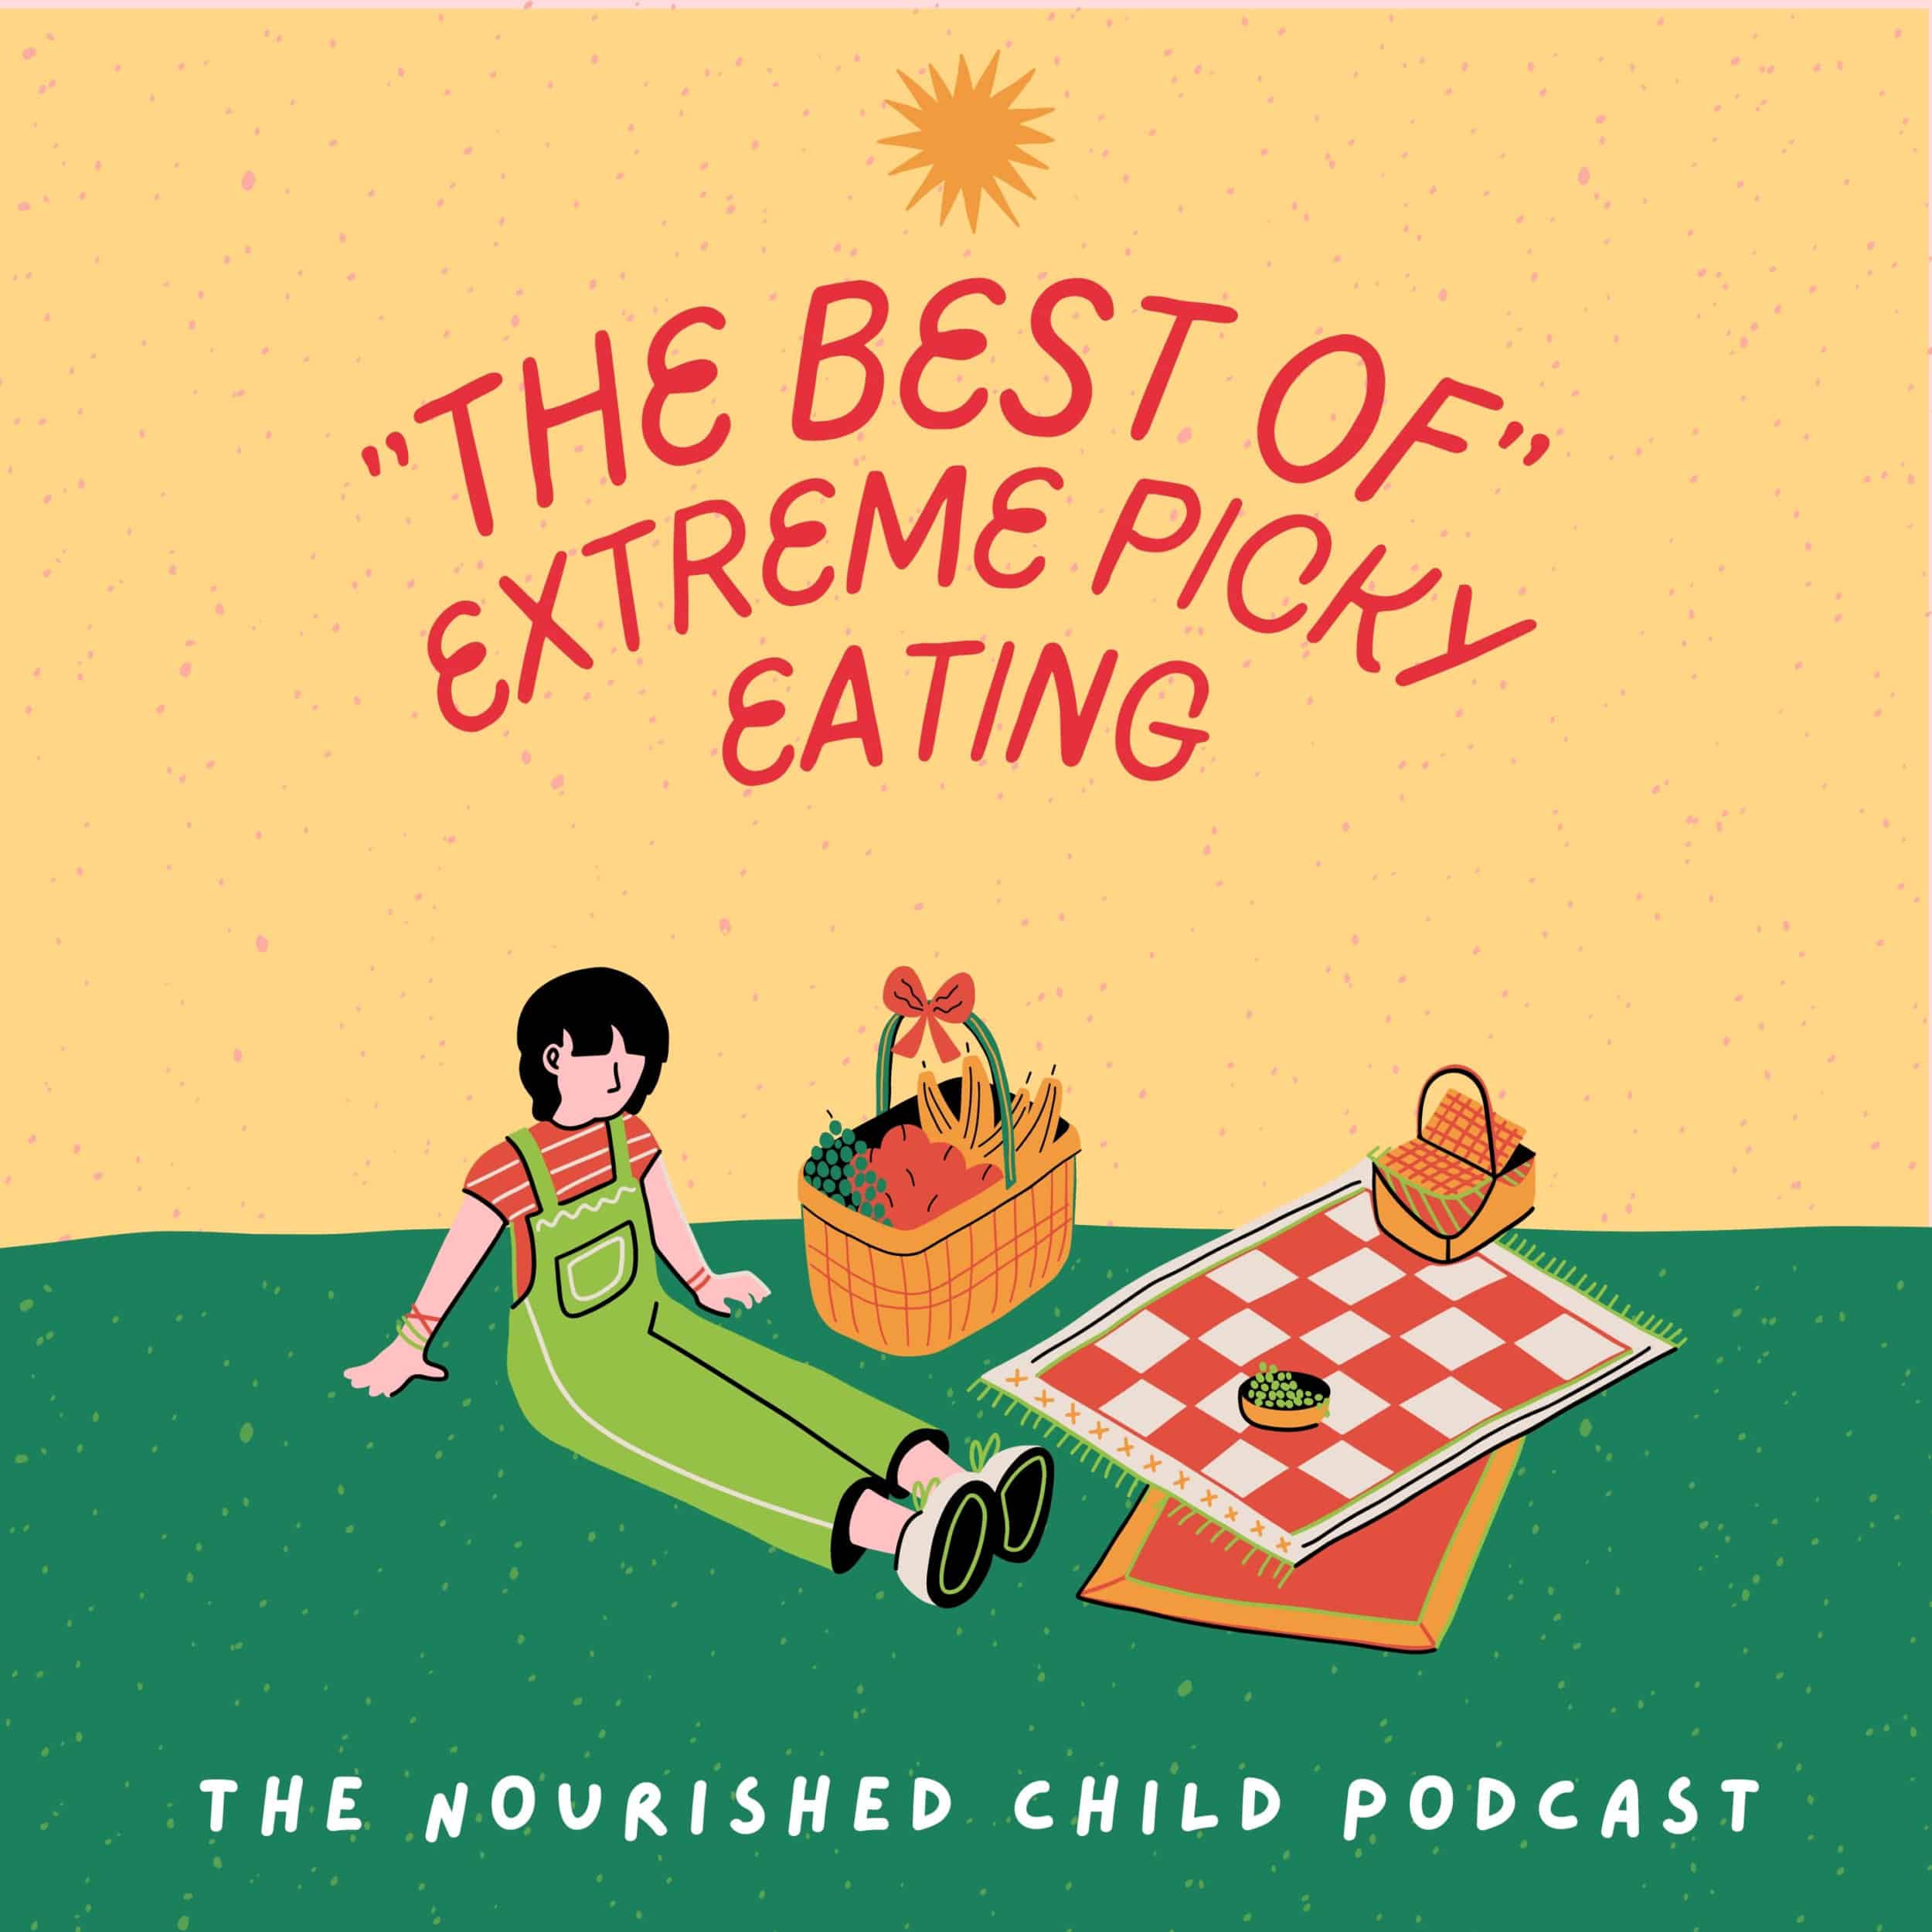 extreme picky eating on the nourished child podcast